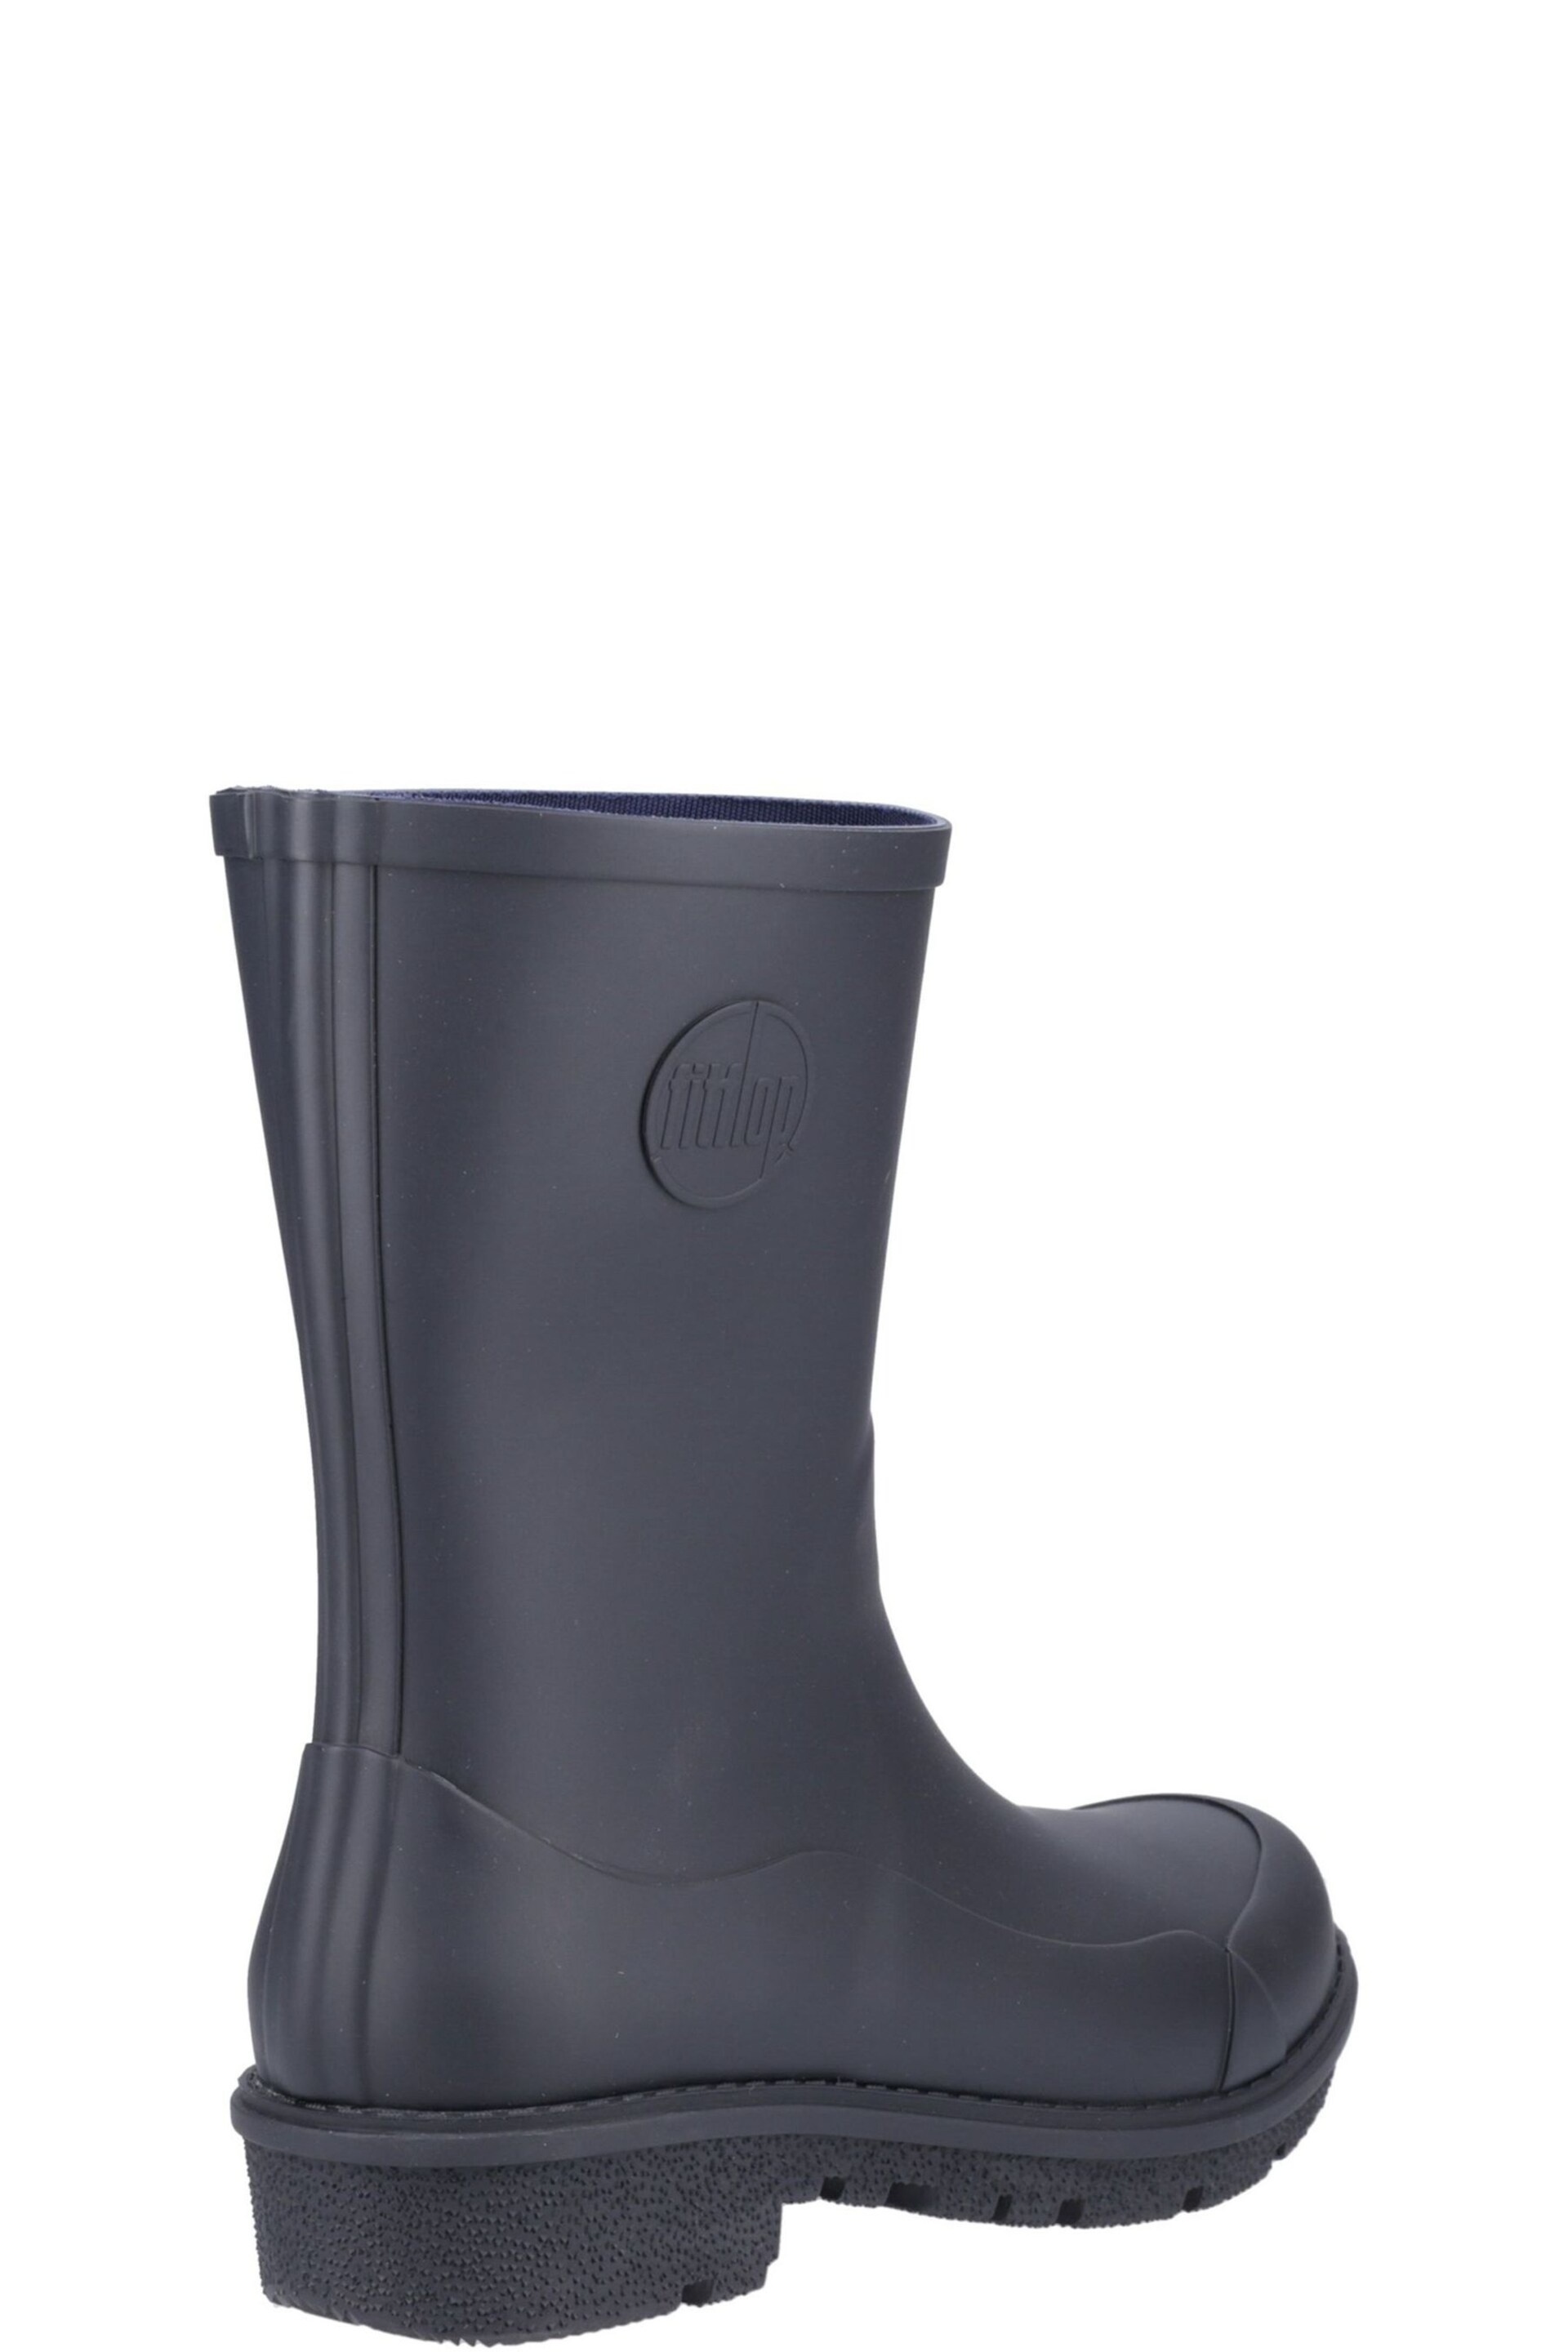 FitFlop Short Blue Wonderwelly Wellies - Image 3 of 5